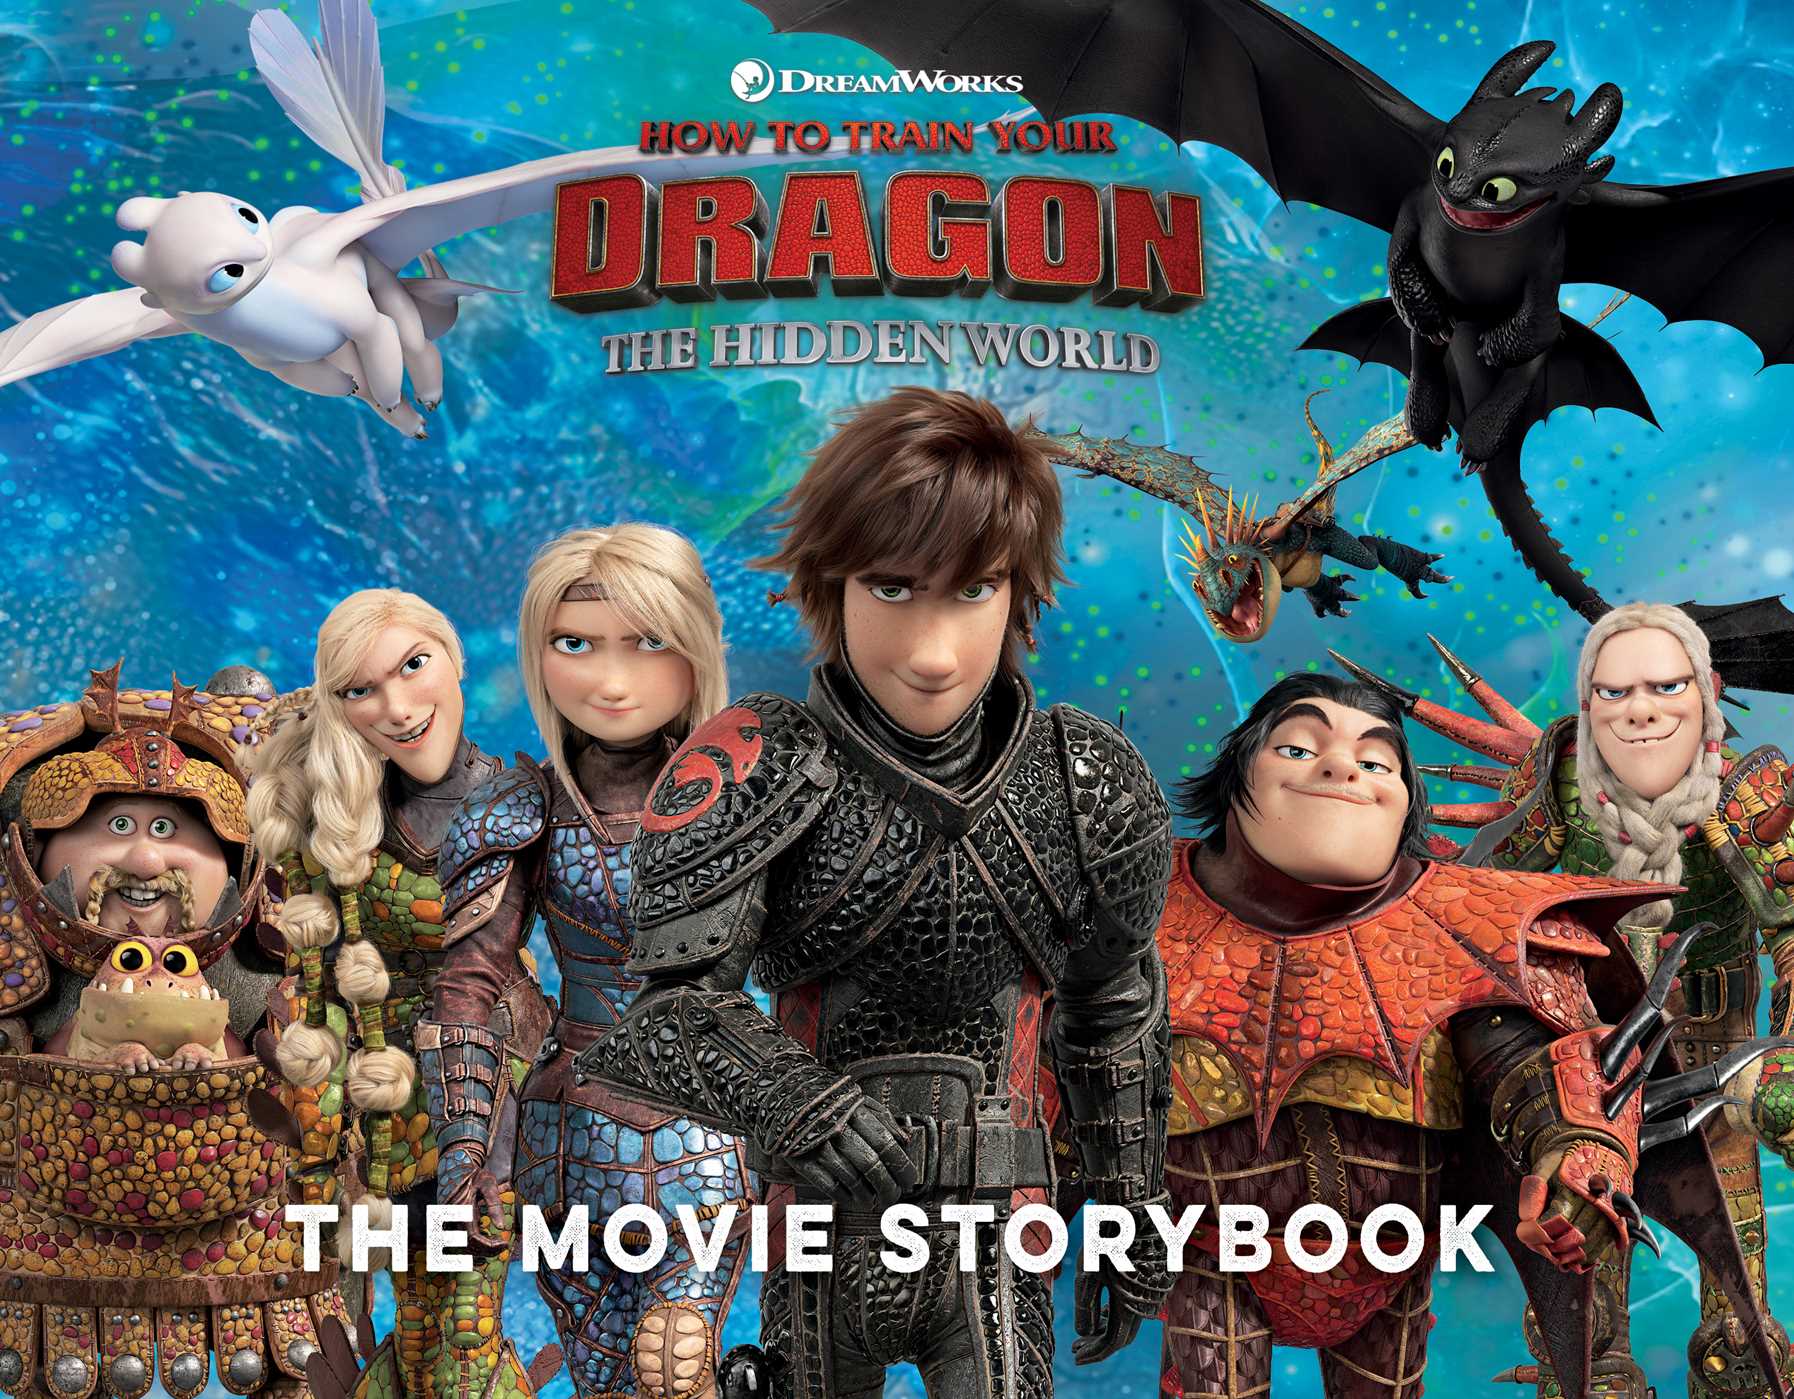 How to Train Your Dragon - wide 7